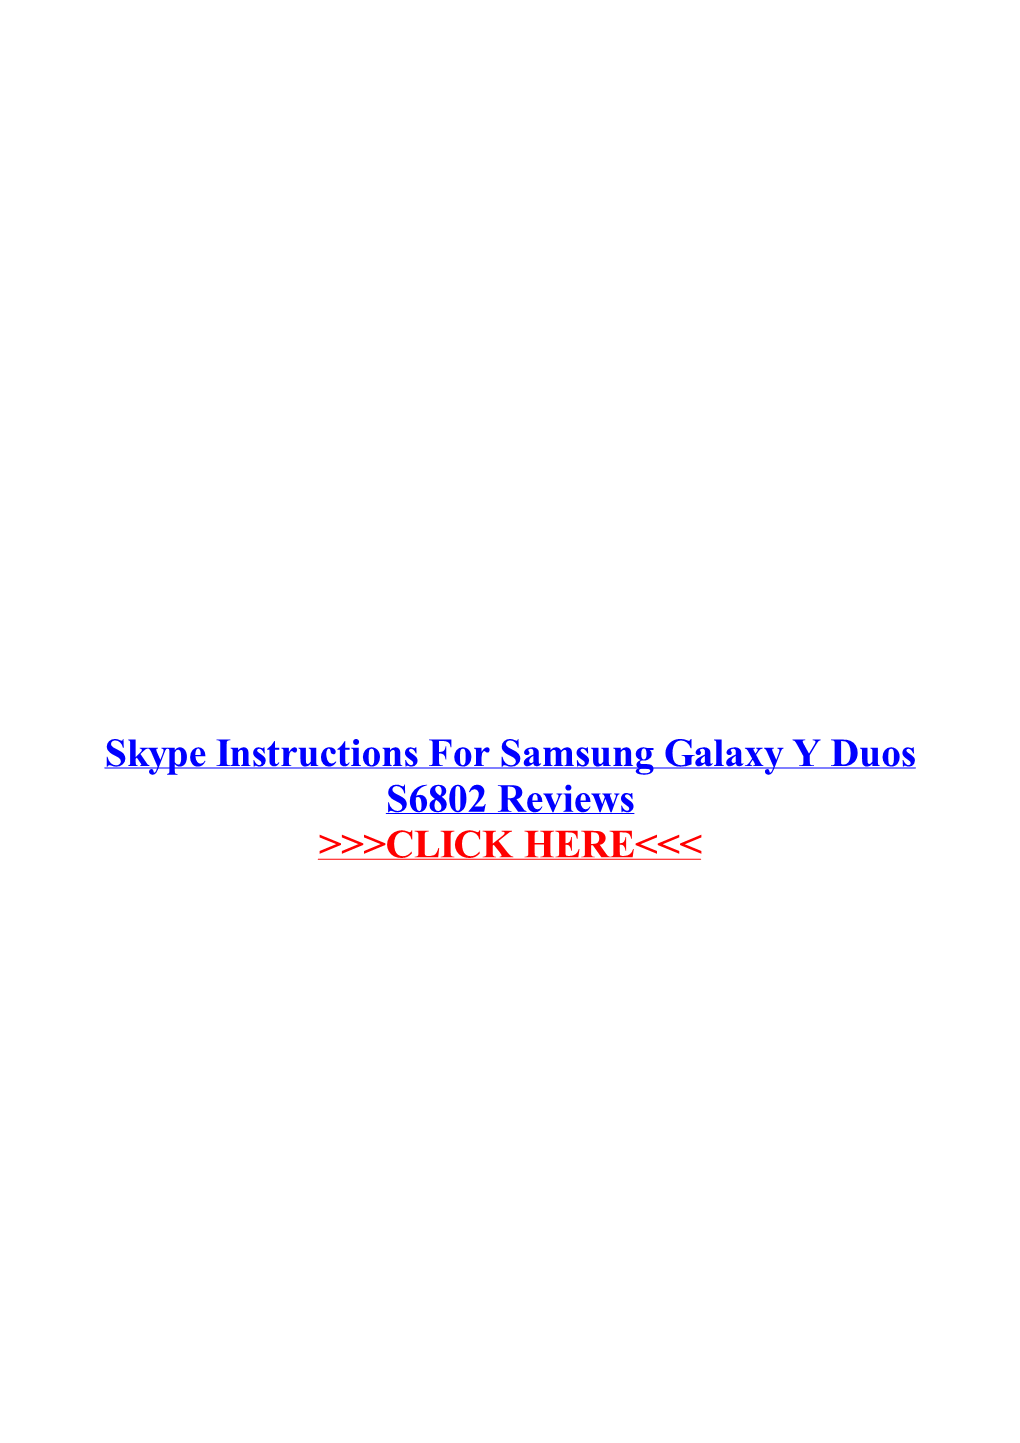 Skype Instructions for Samsung Galaxy Y Duos S6802 Reviews